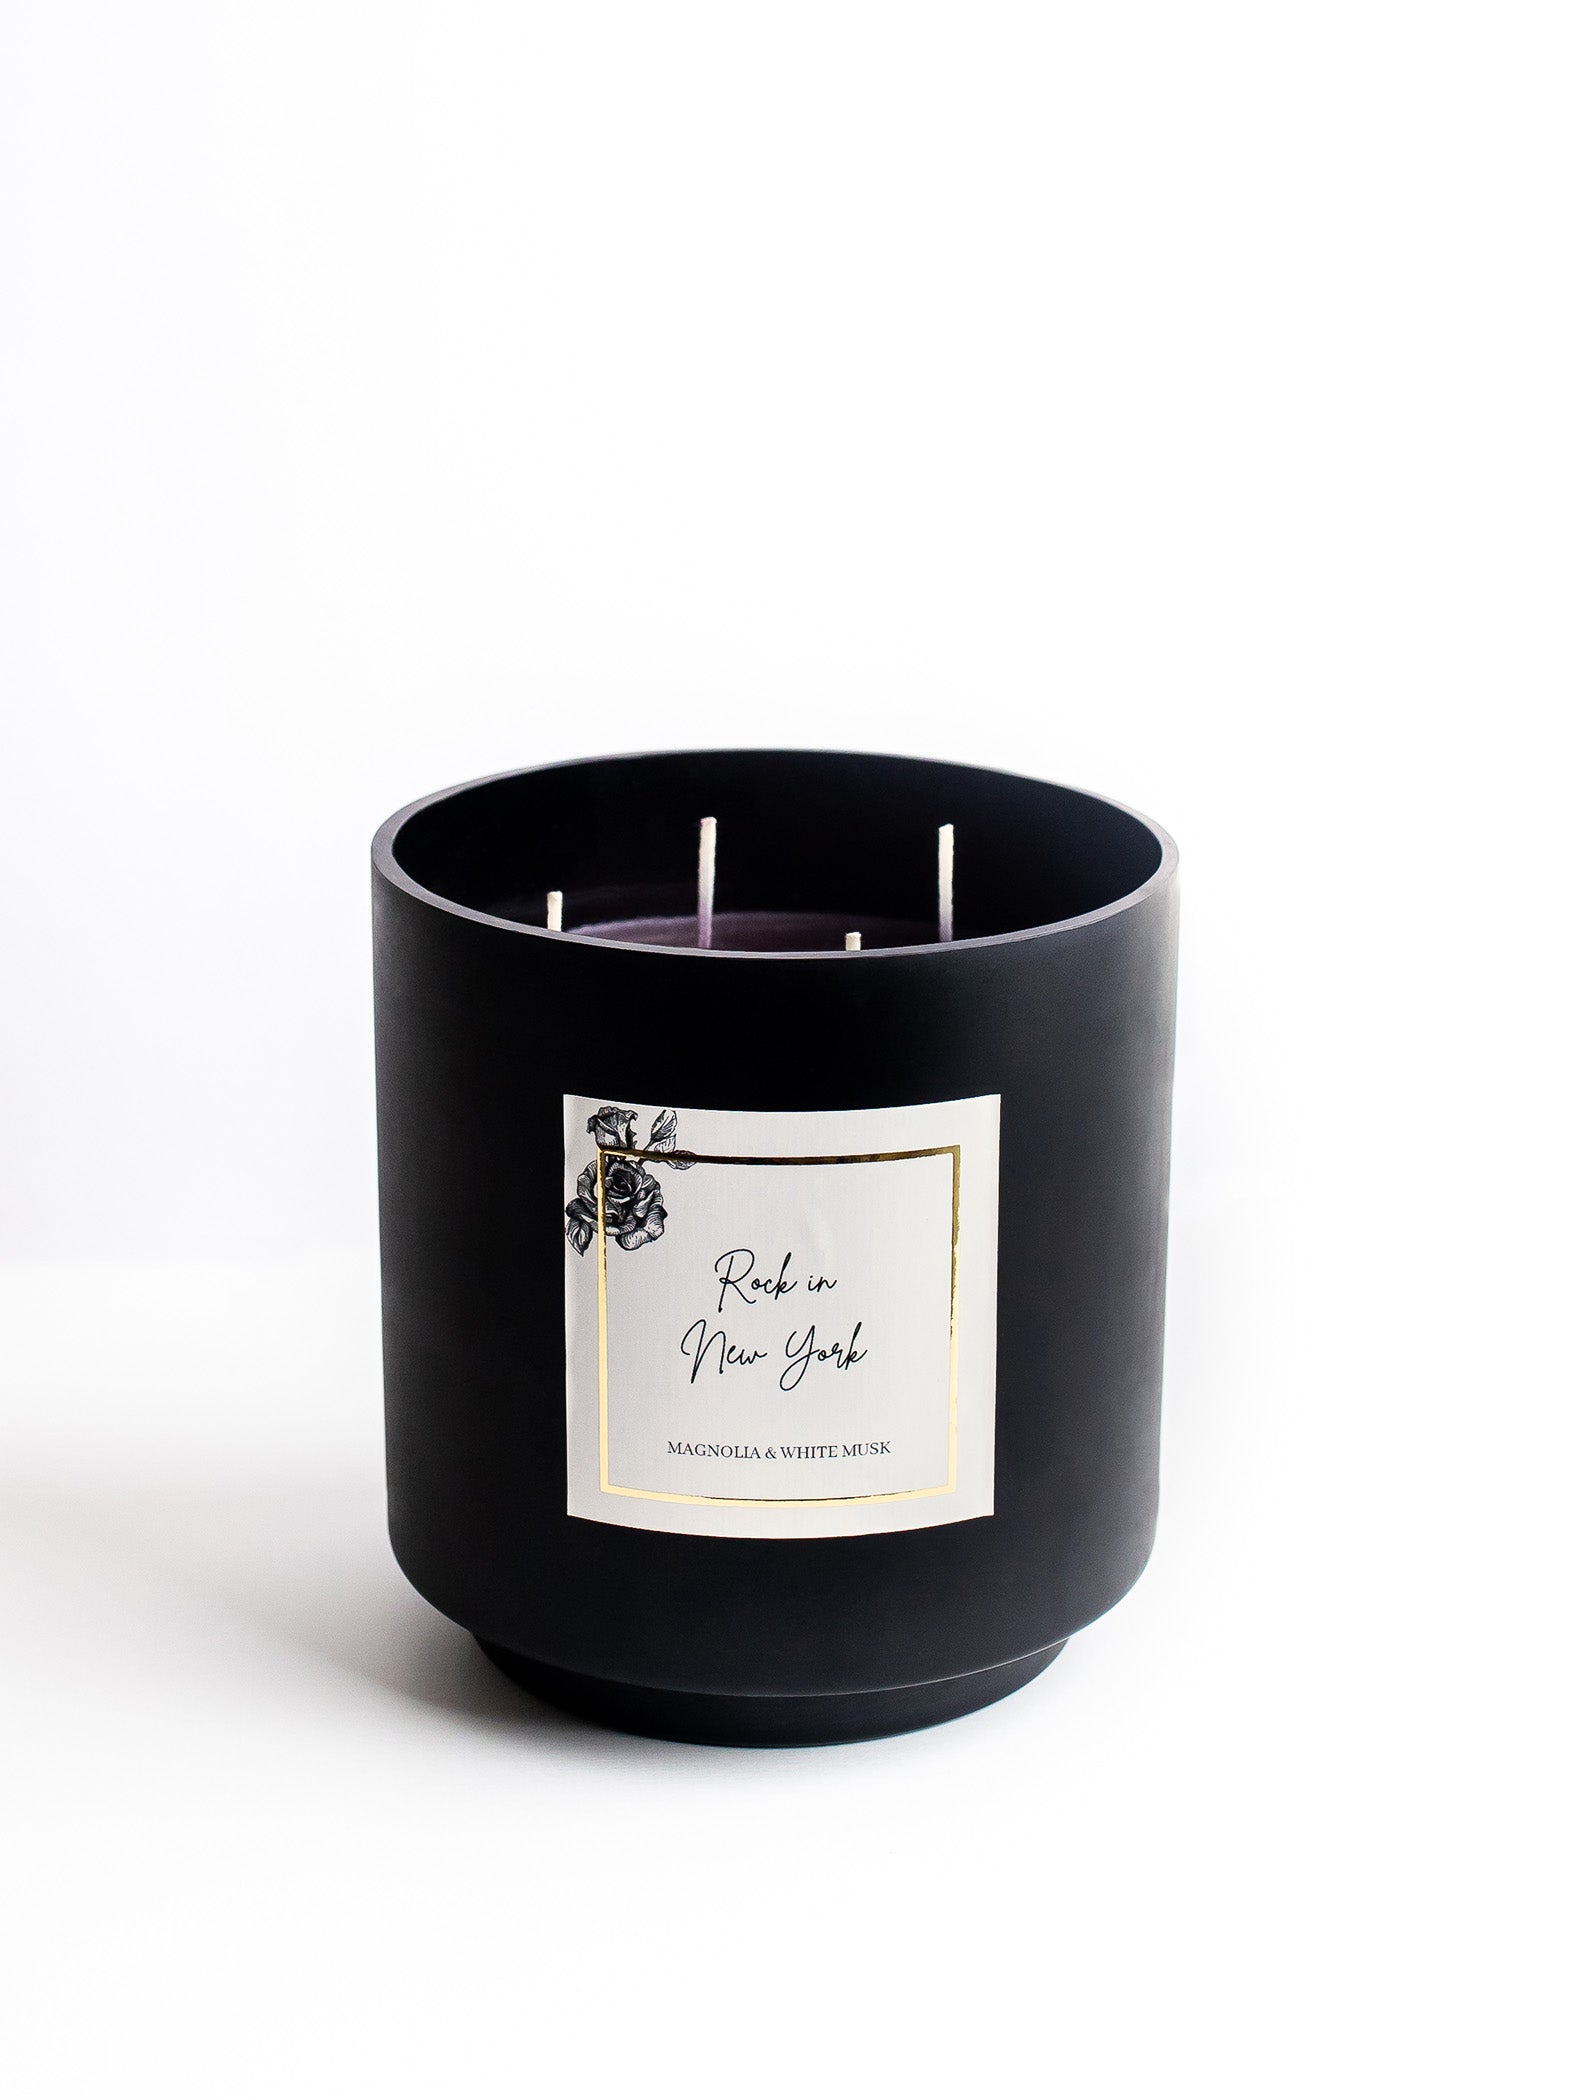 Large New York Candle by Ren Home